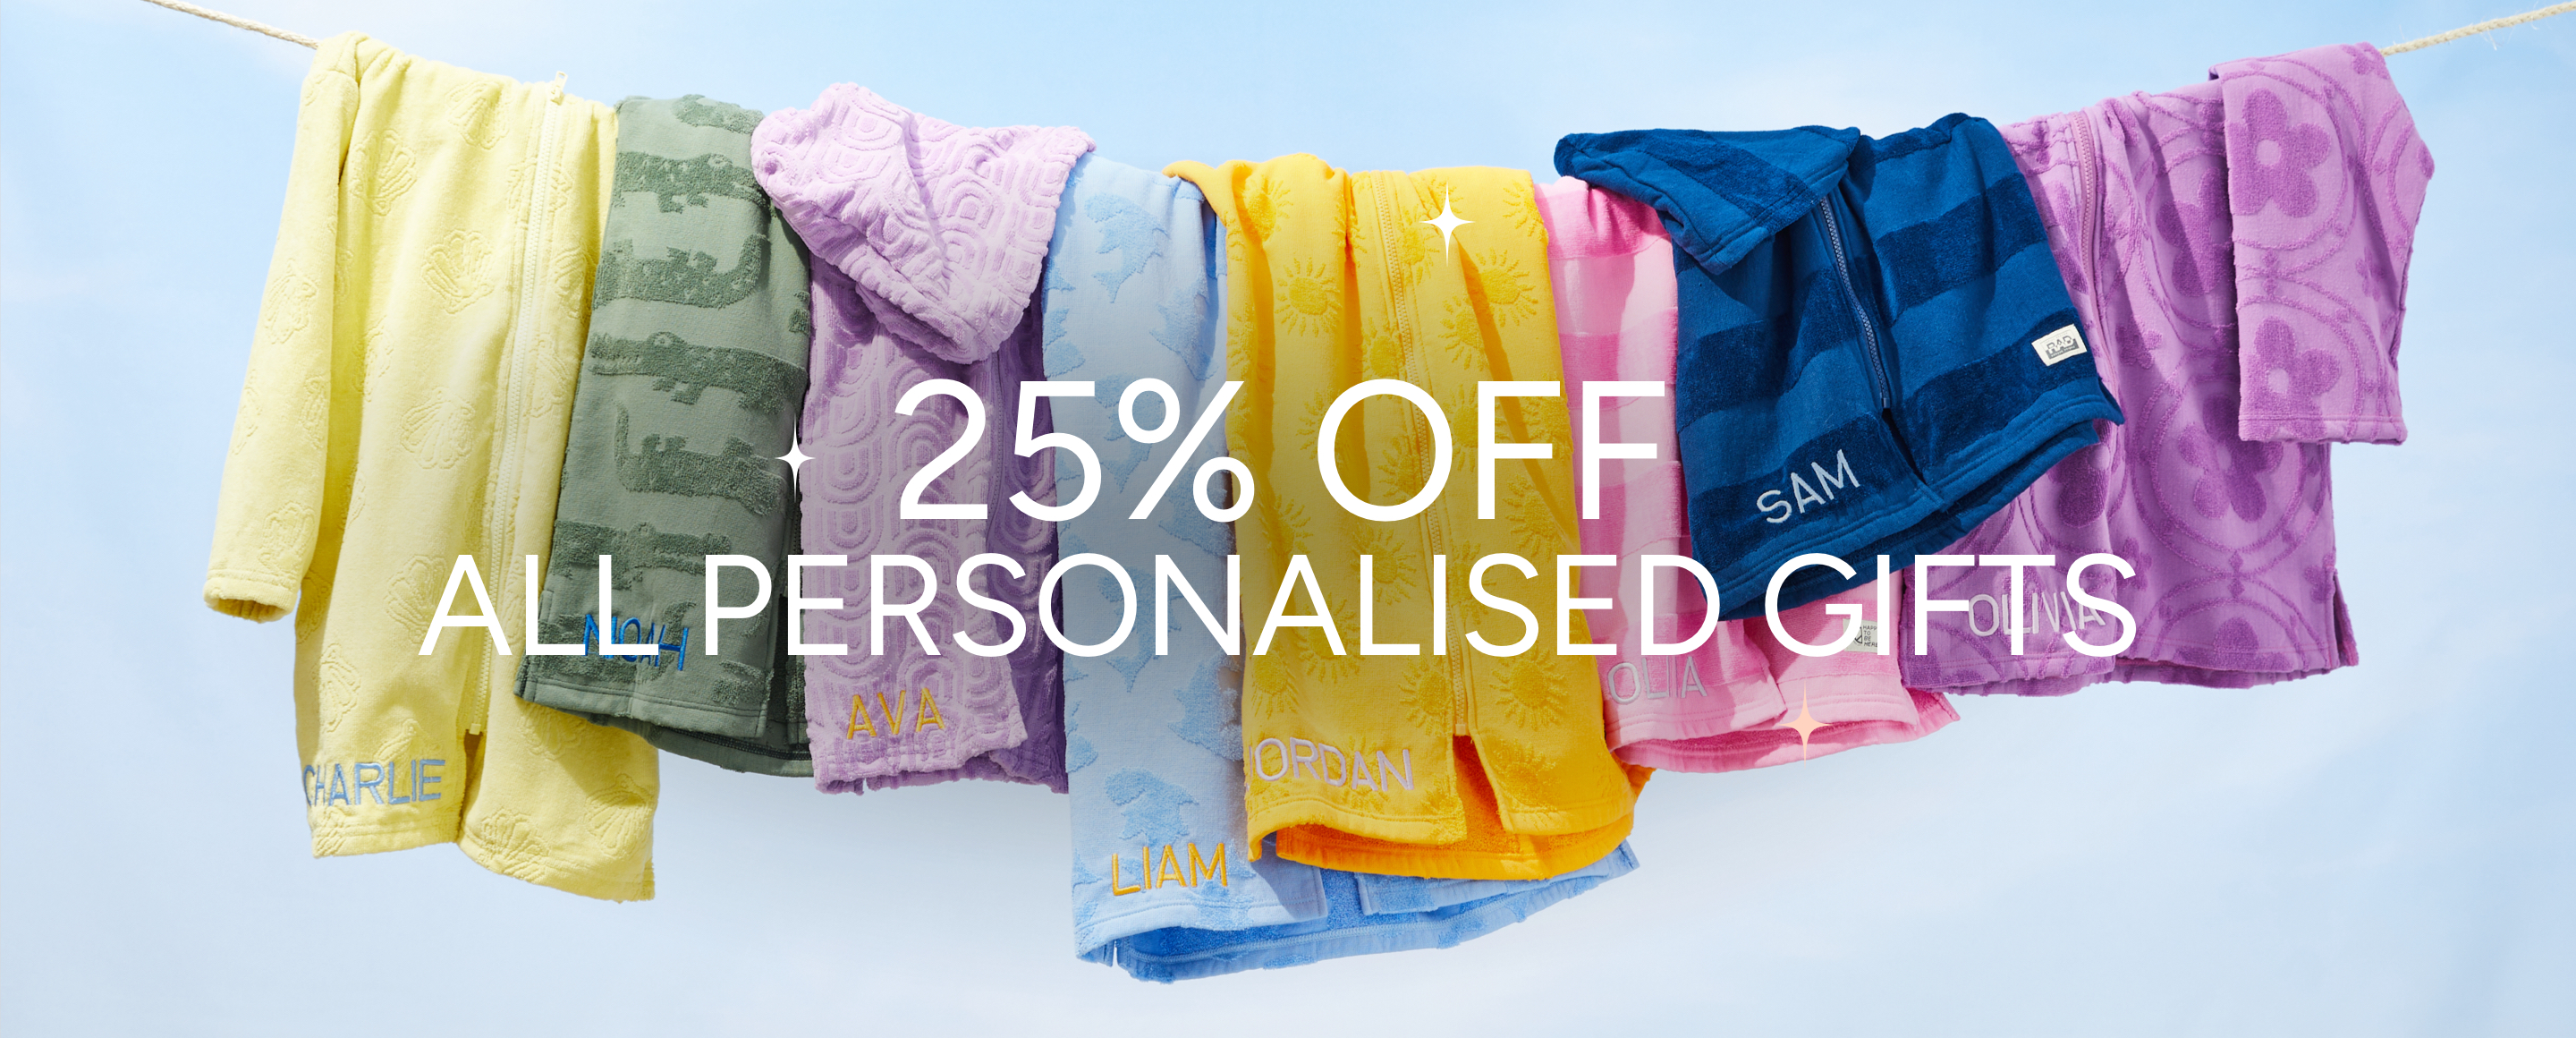 25% off all personalised gifts